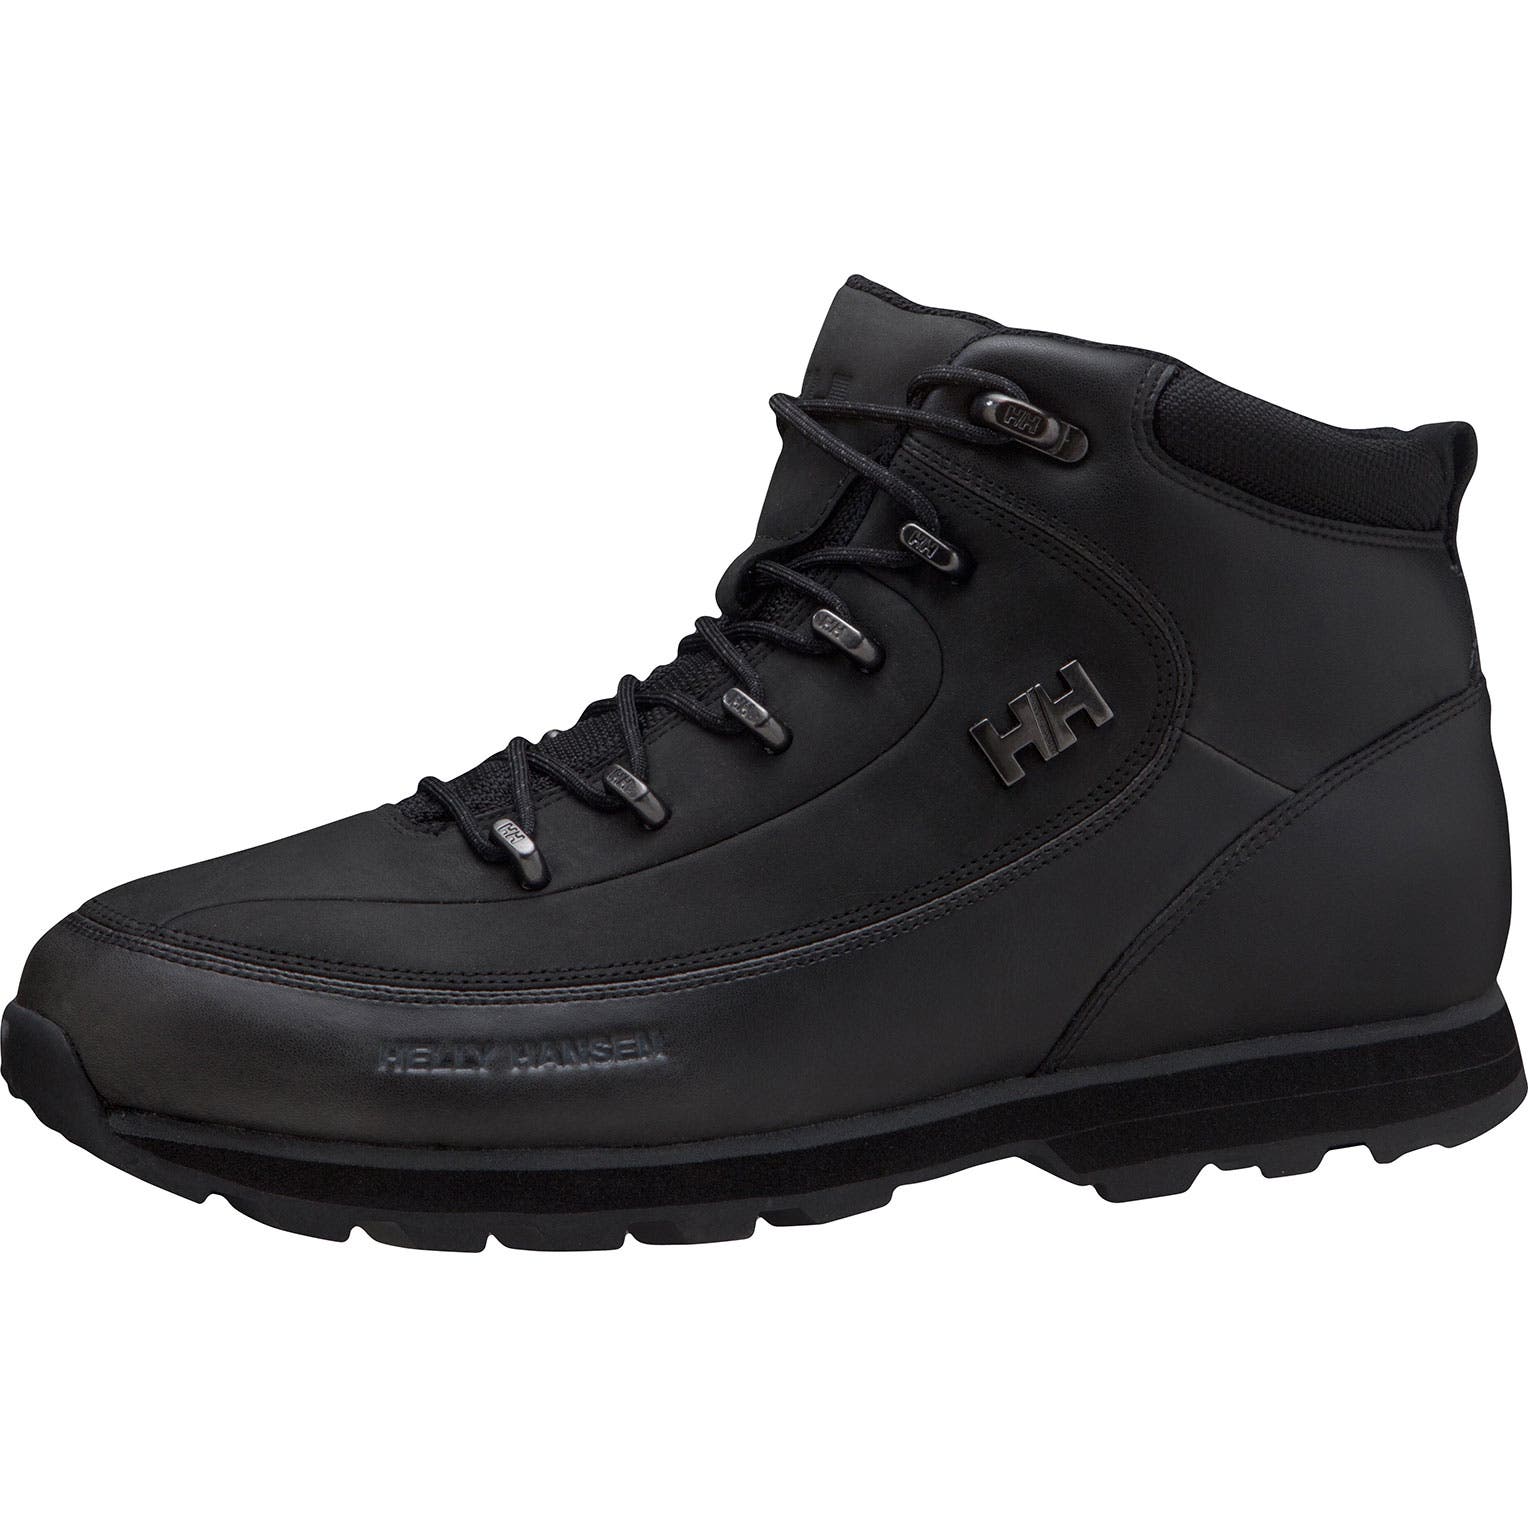 Helly Hansen Men's The Forester Winter Boot in Jet Black from the side